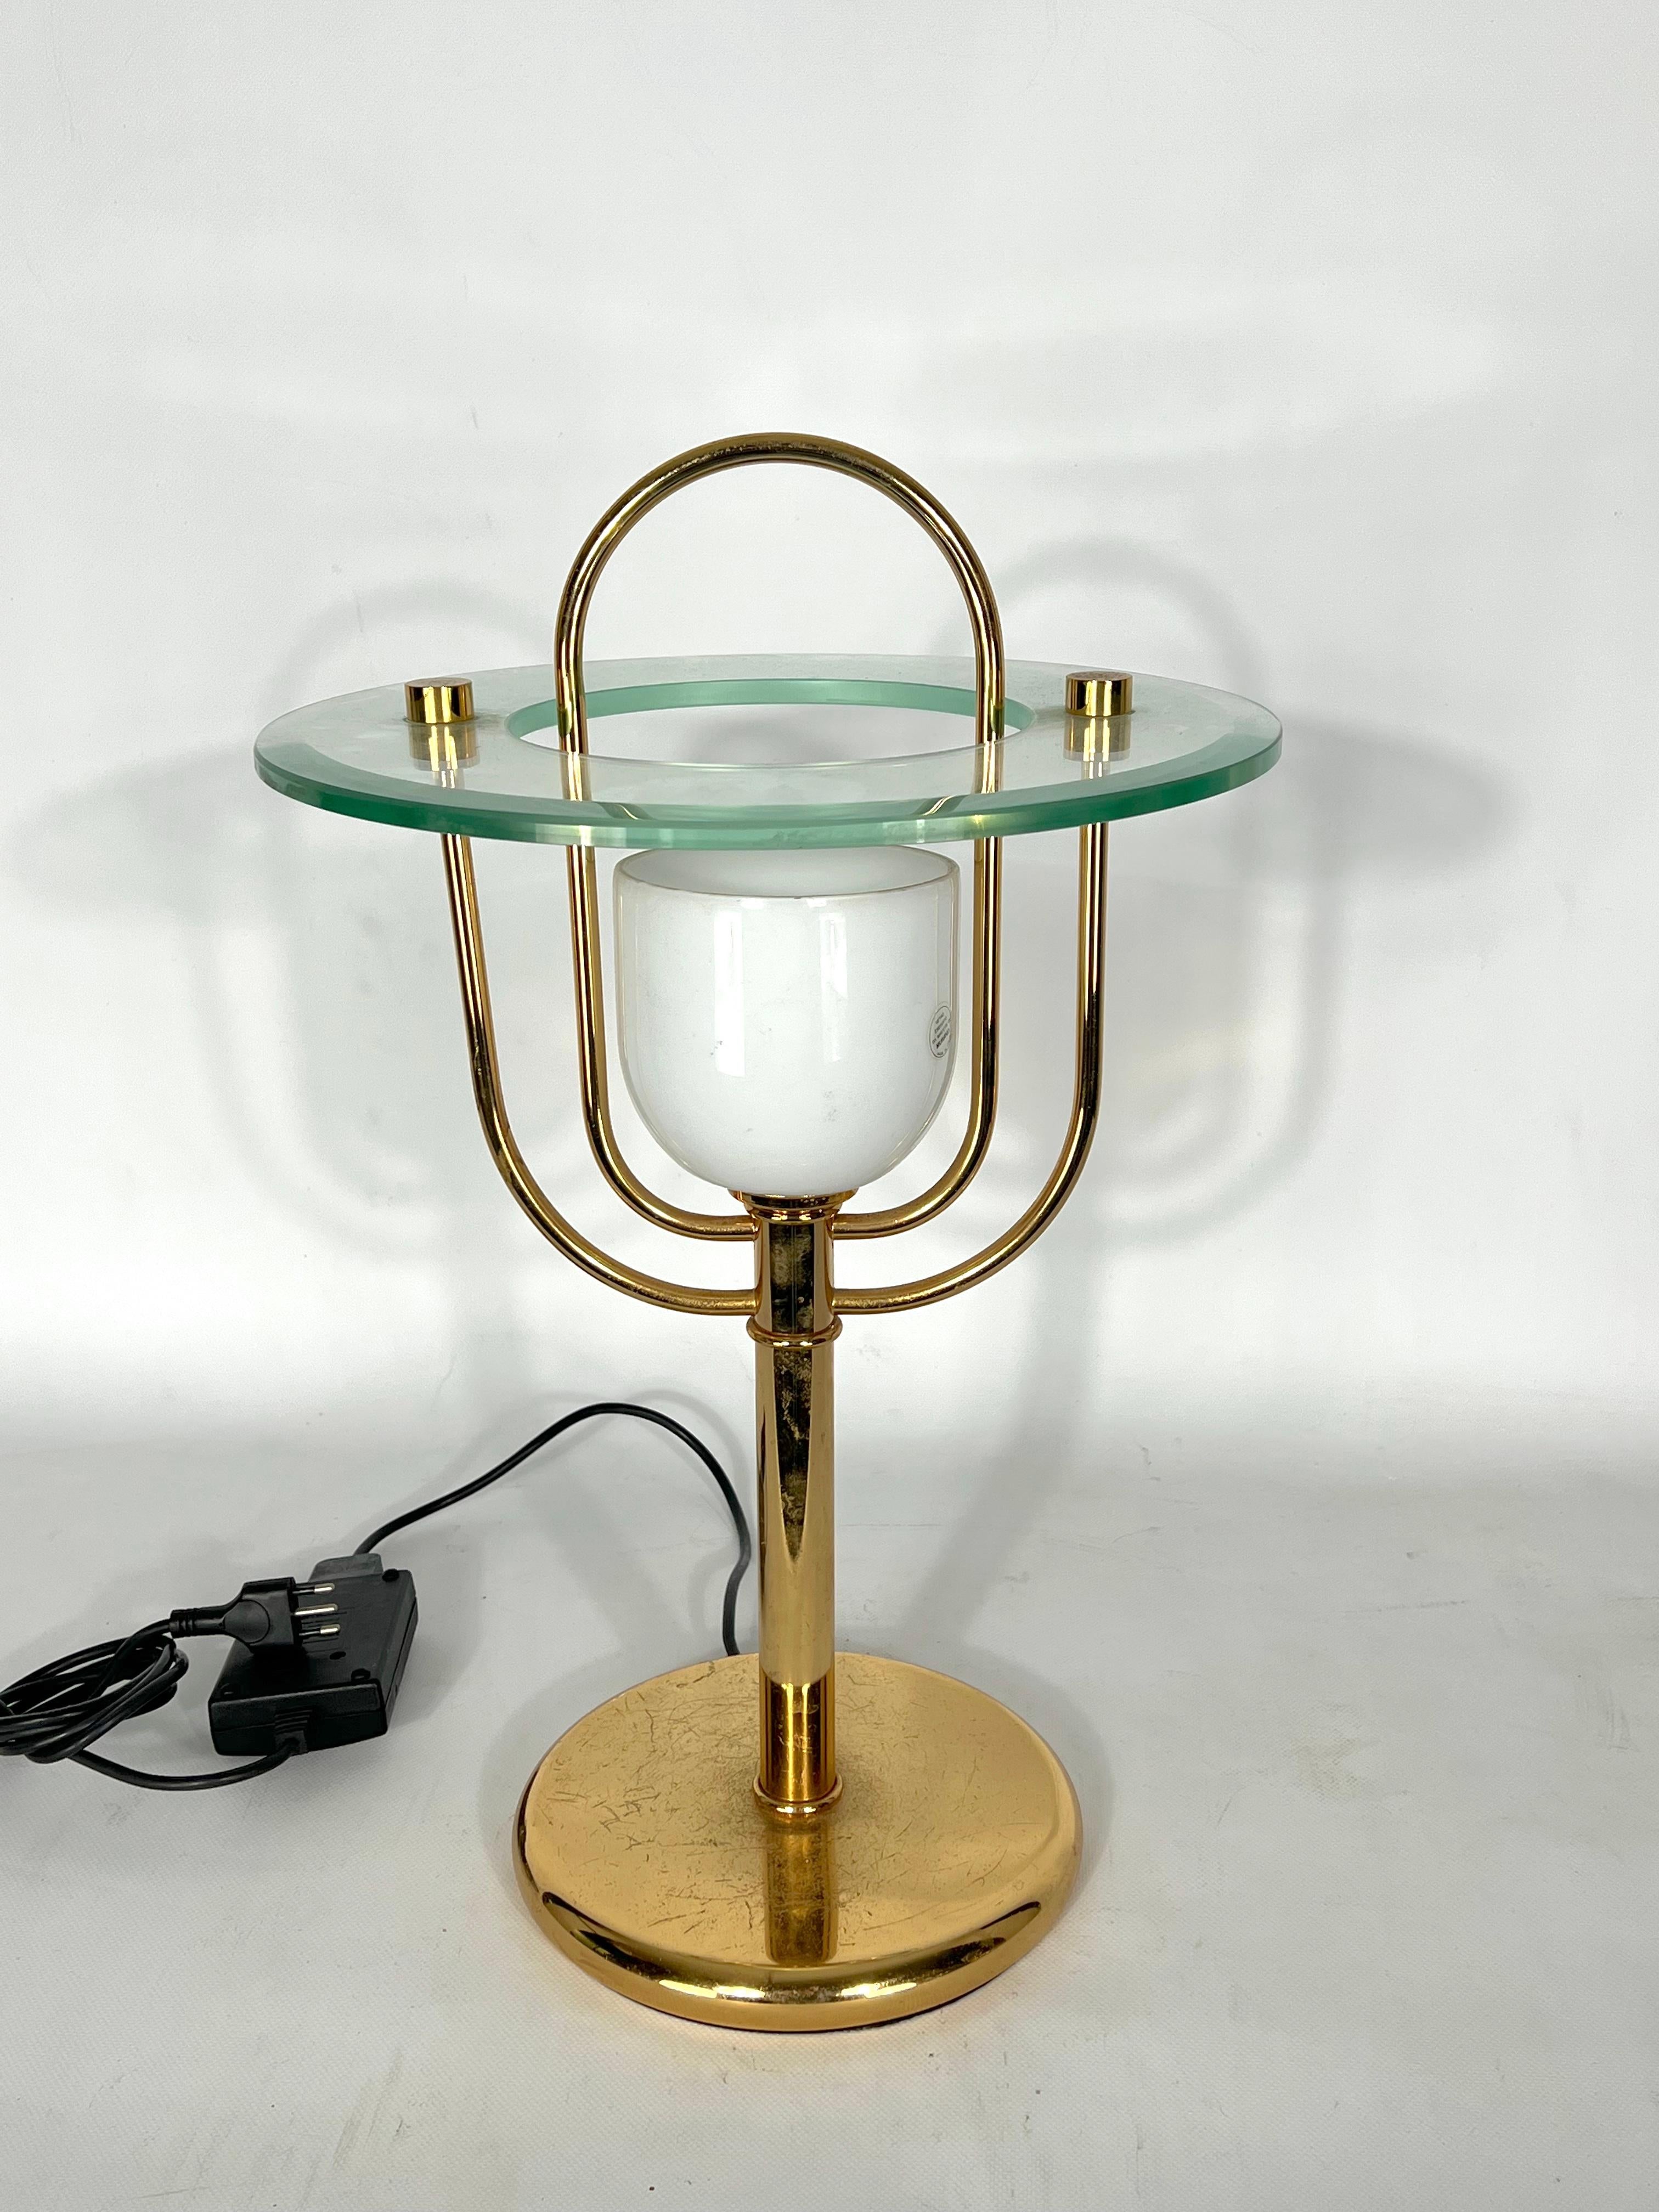 Good vintage condition with trace of age and use. No cracks or chips. Made from brass, clear thick glass and milk murano glass. Reminiscent of Fontana Arte style. Produced in Italy during the 70s. Full working with EU standard, adaptable on demand